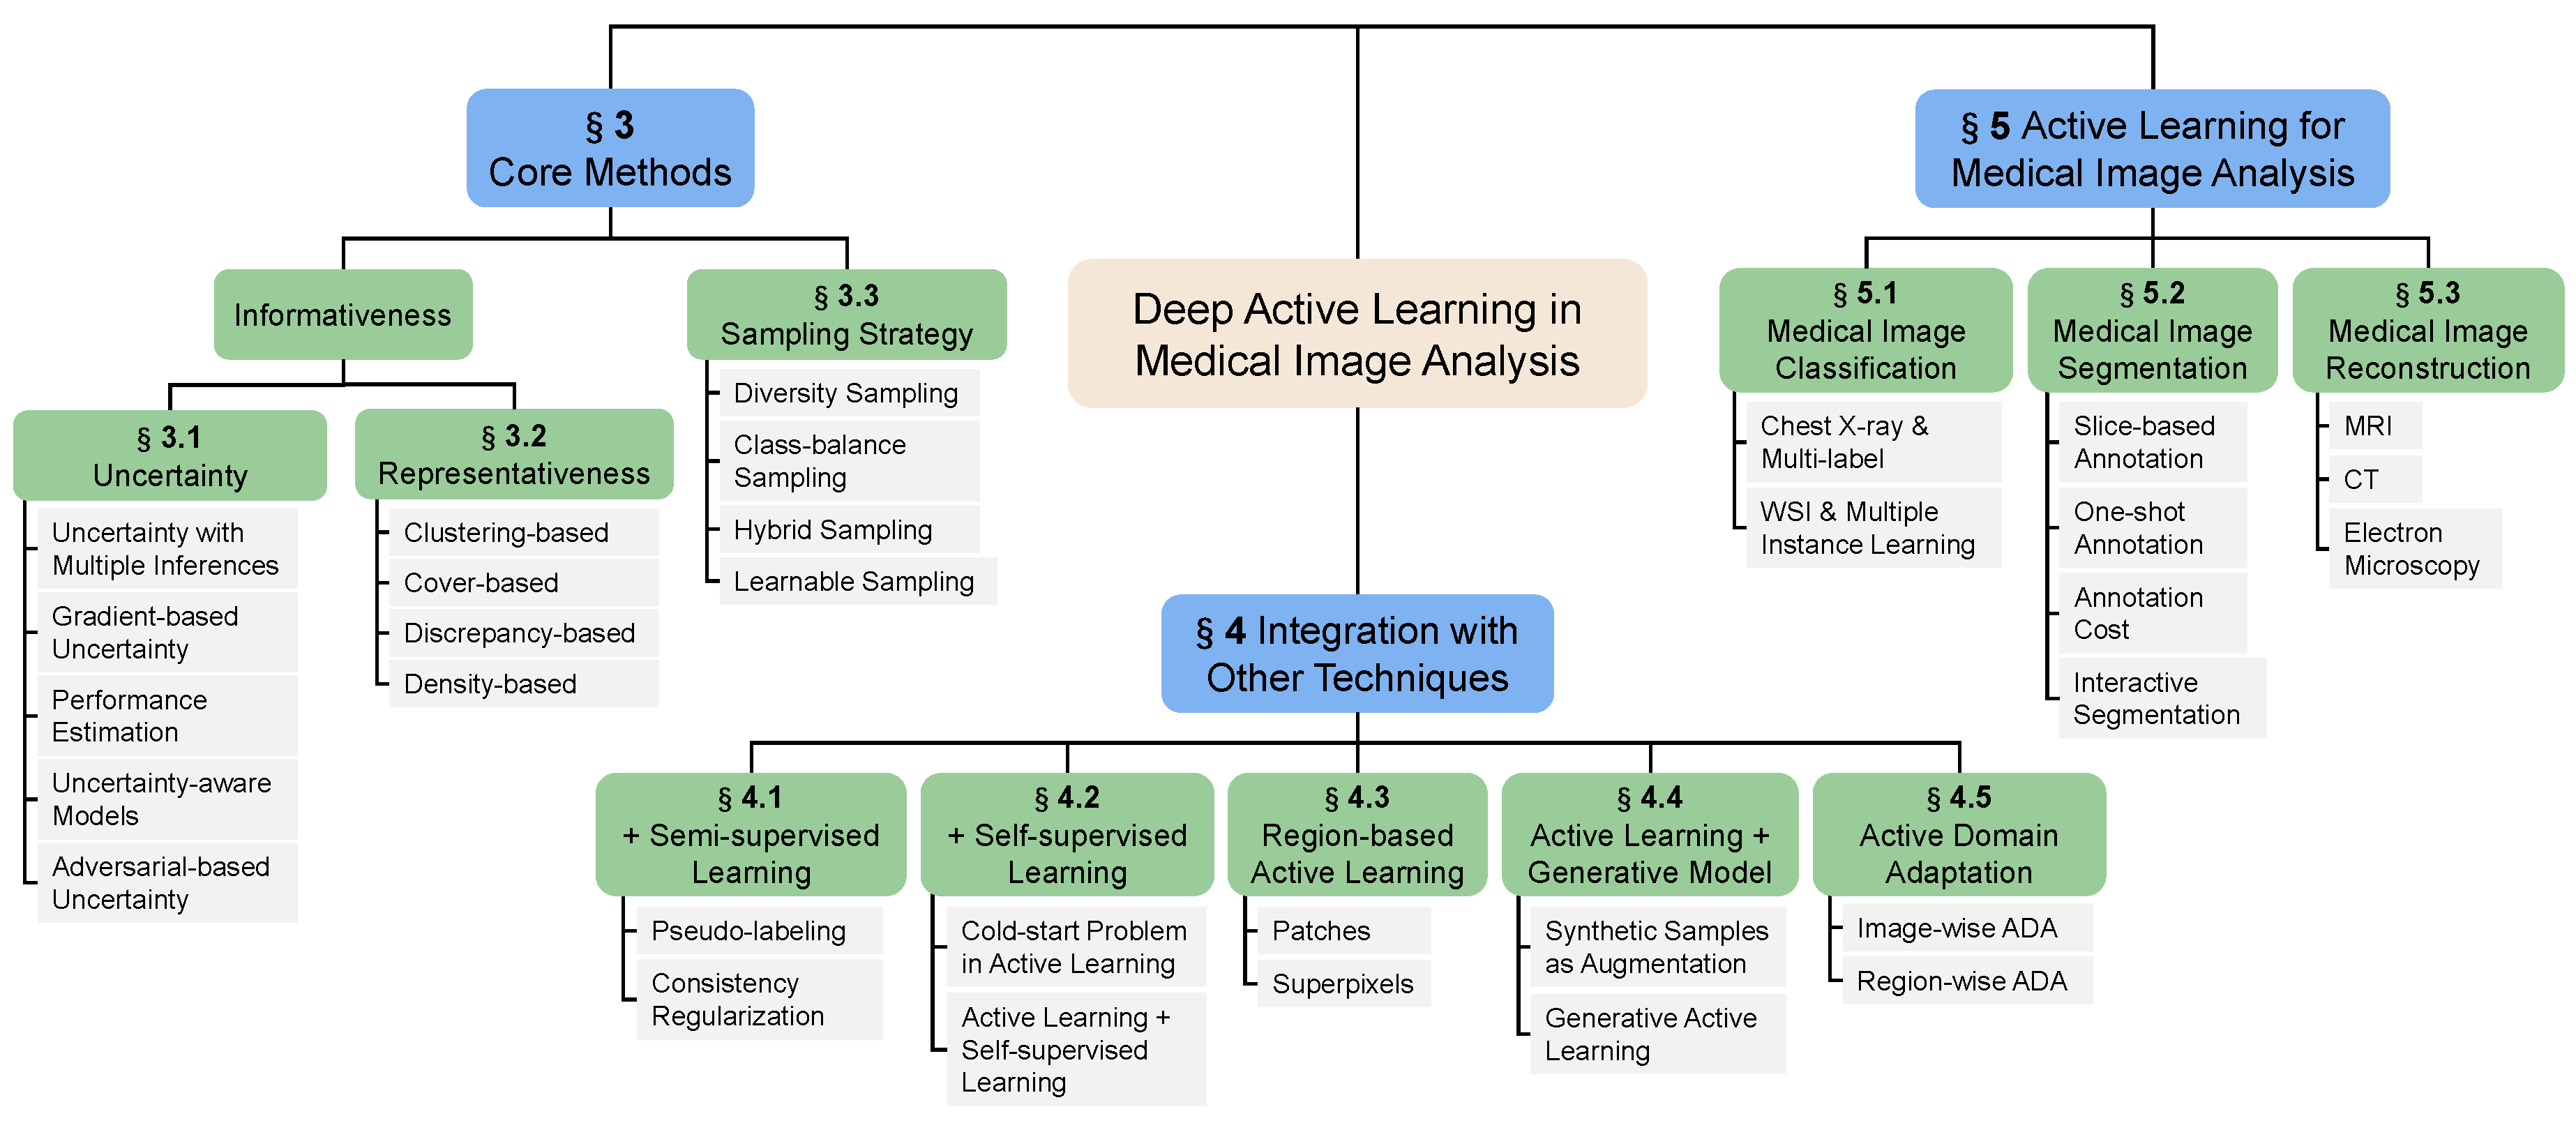 [MedIA] A comprehensive survey on deep active learning in medical image analysis